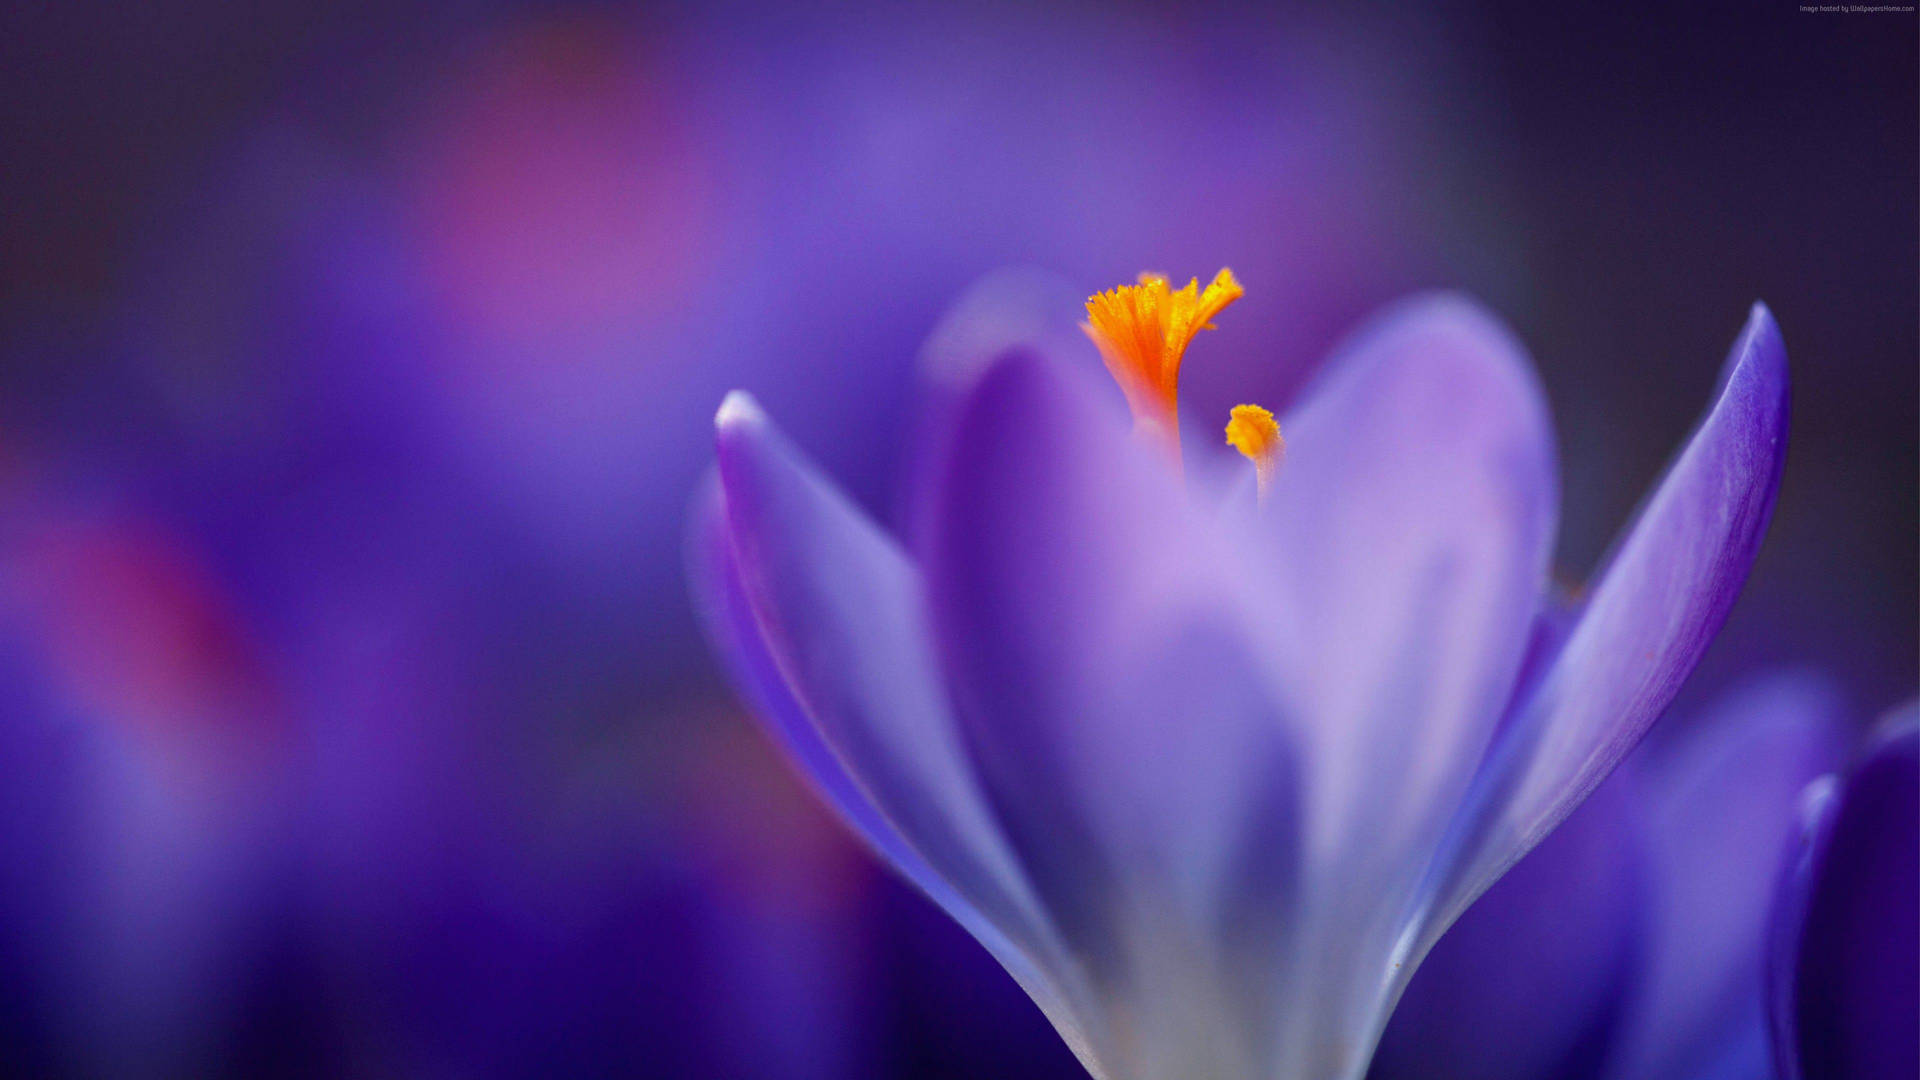 Macro Flower With Blurry Purple Petals Background